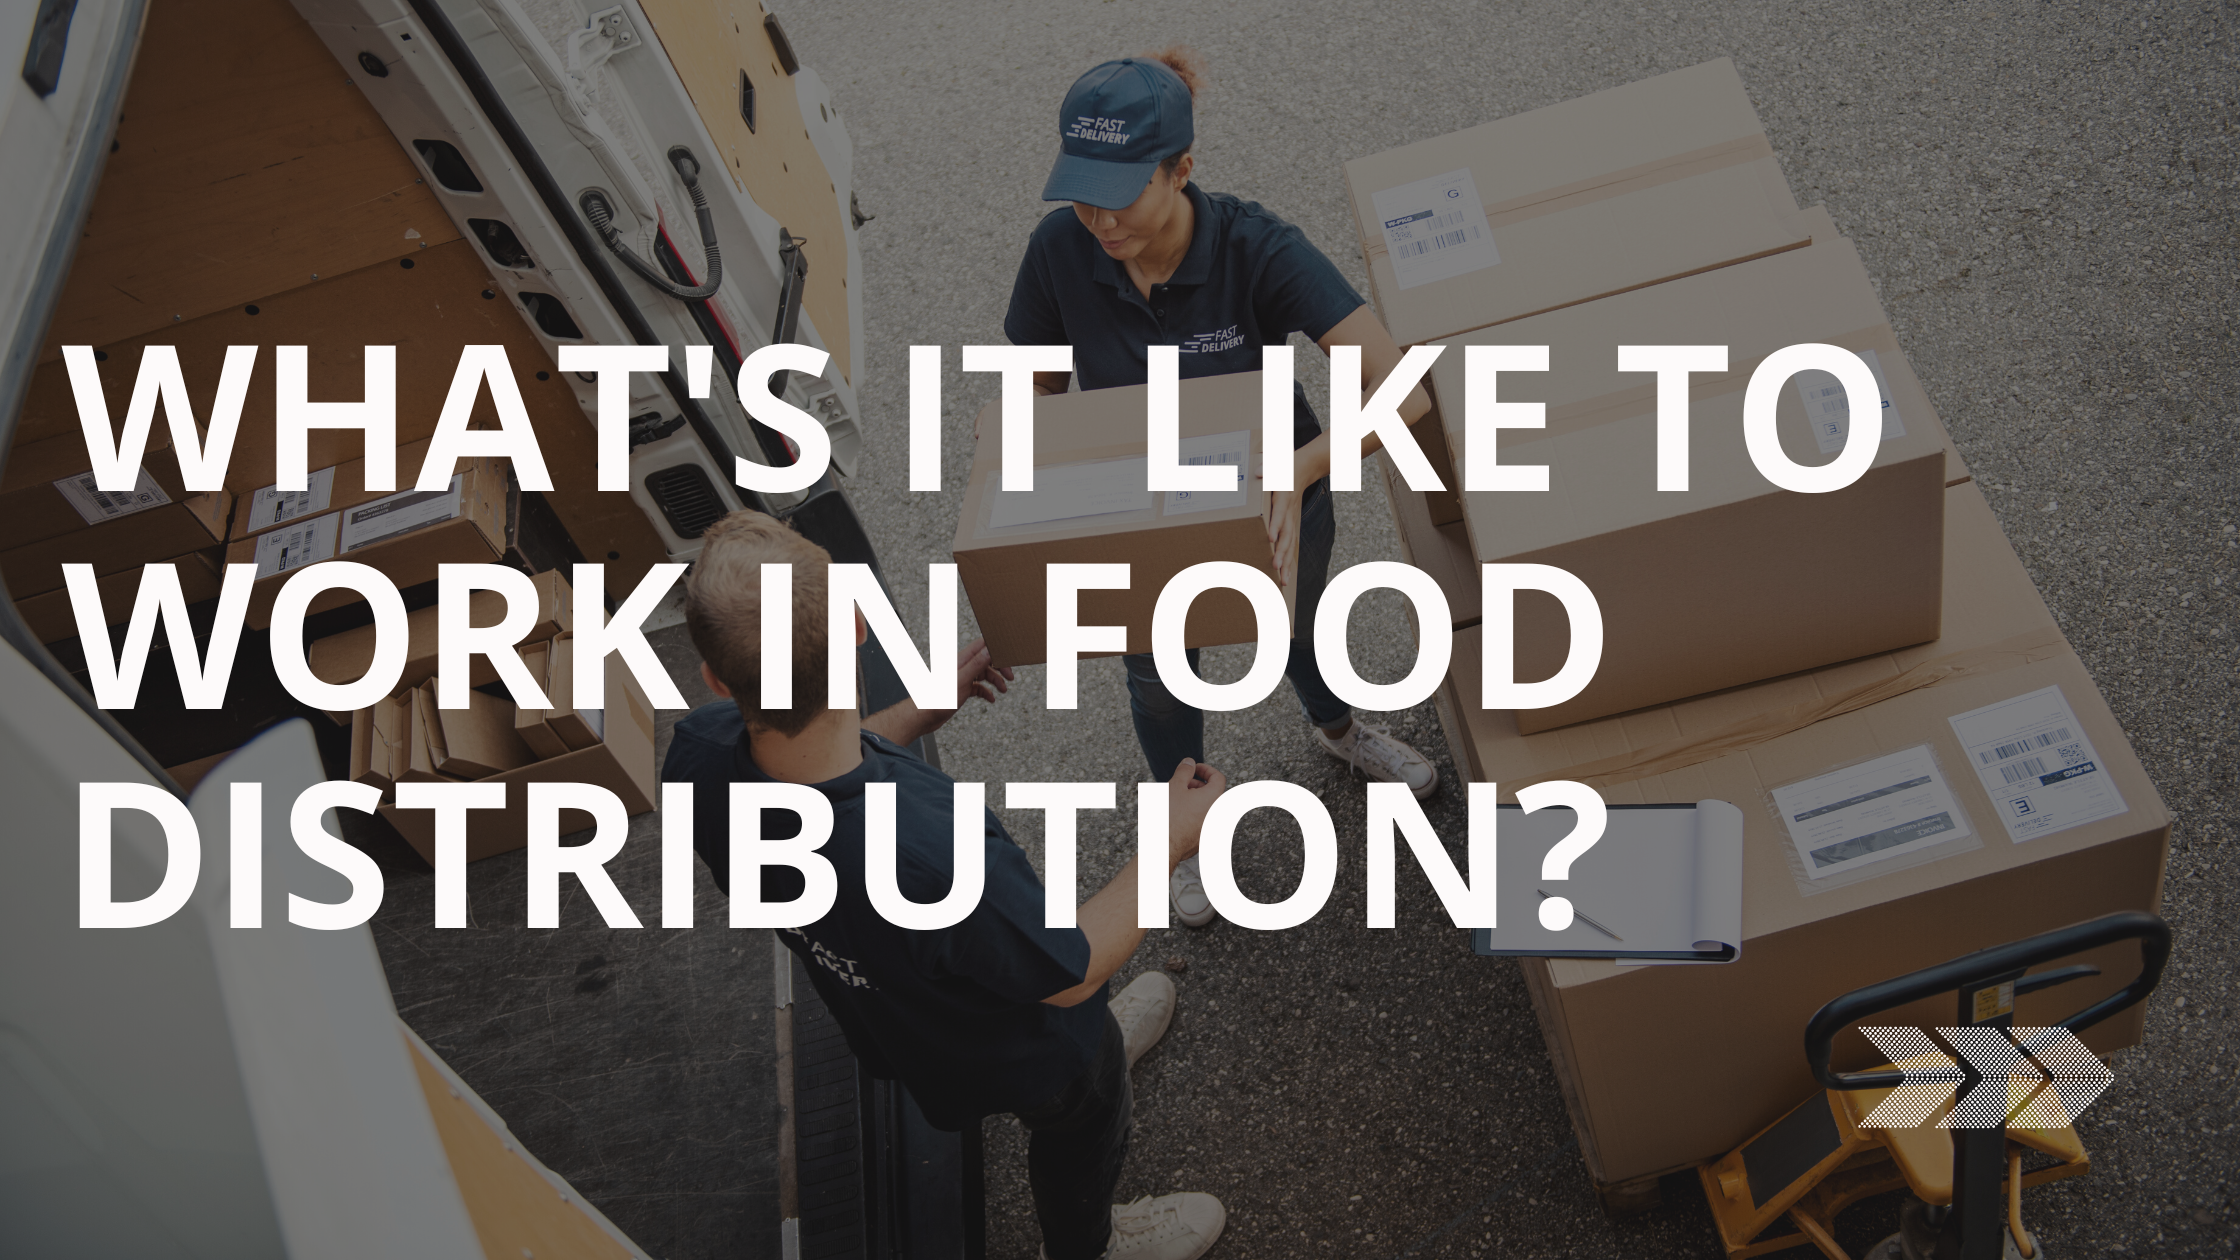 Whats it like to work in food distribution?